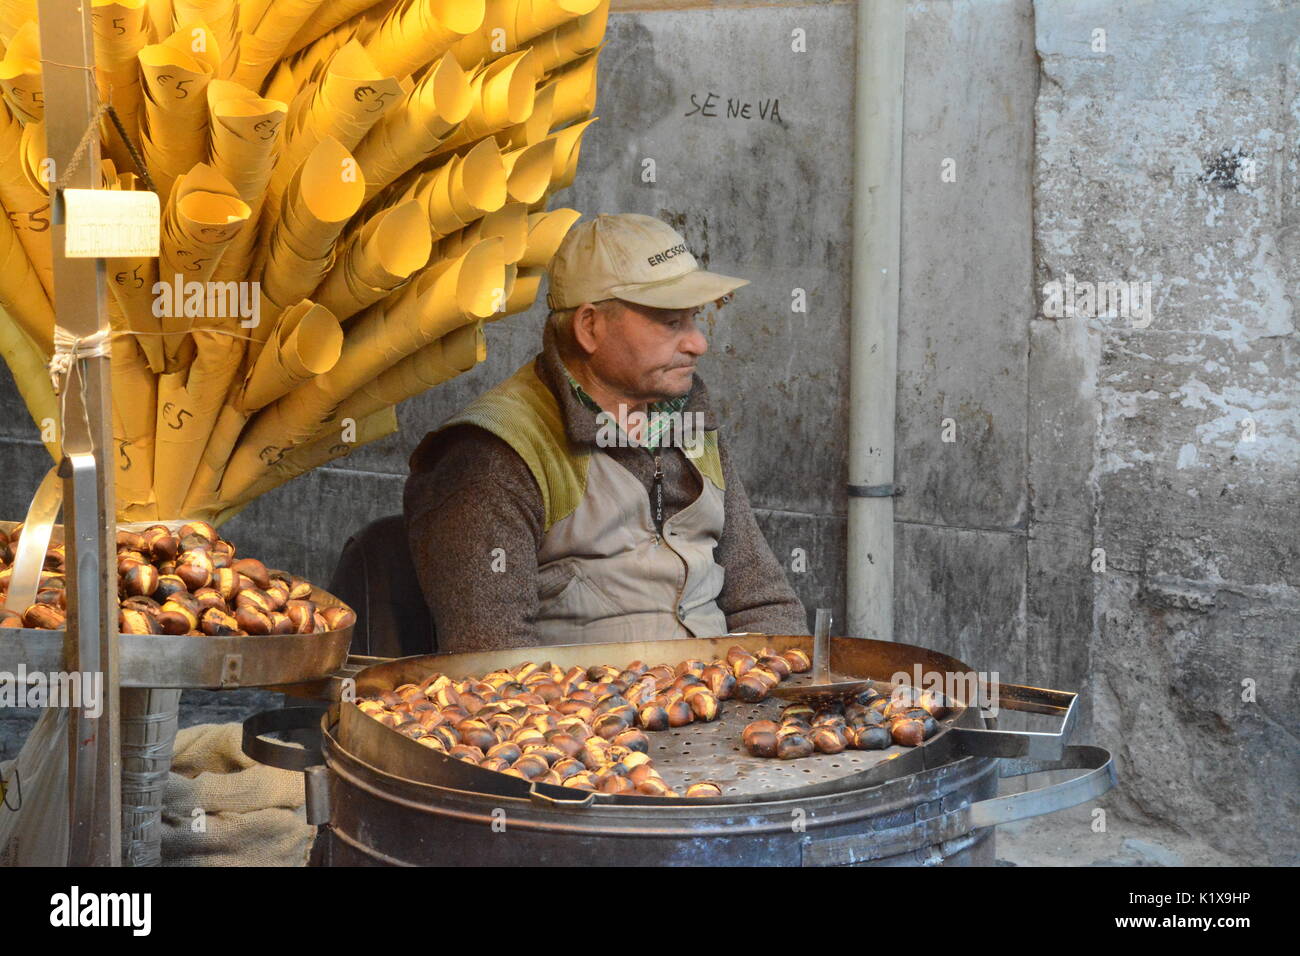 Elderley man selling roasted chestnuts in Rome, Italy Stock Photo